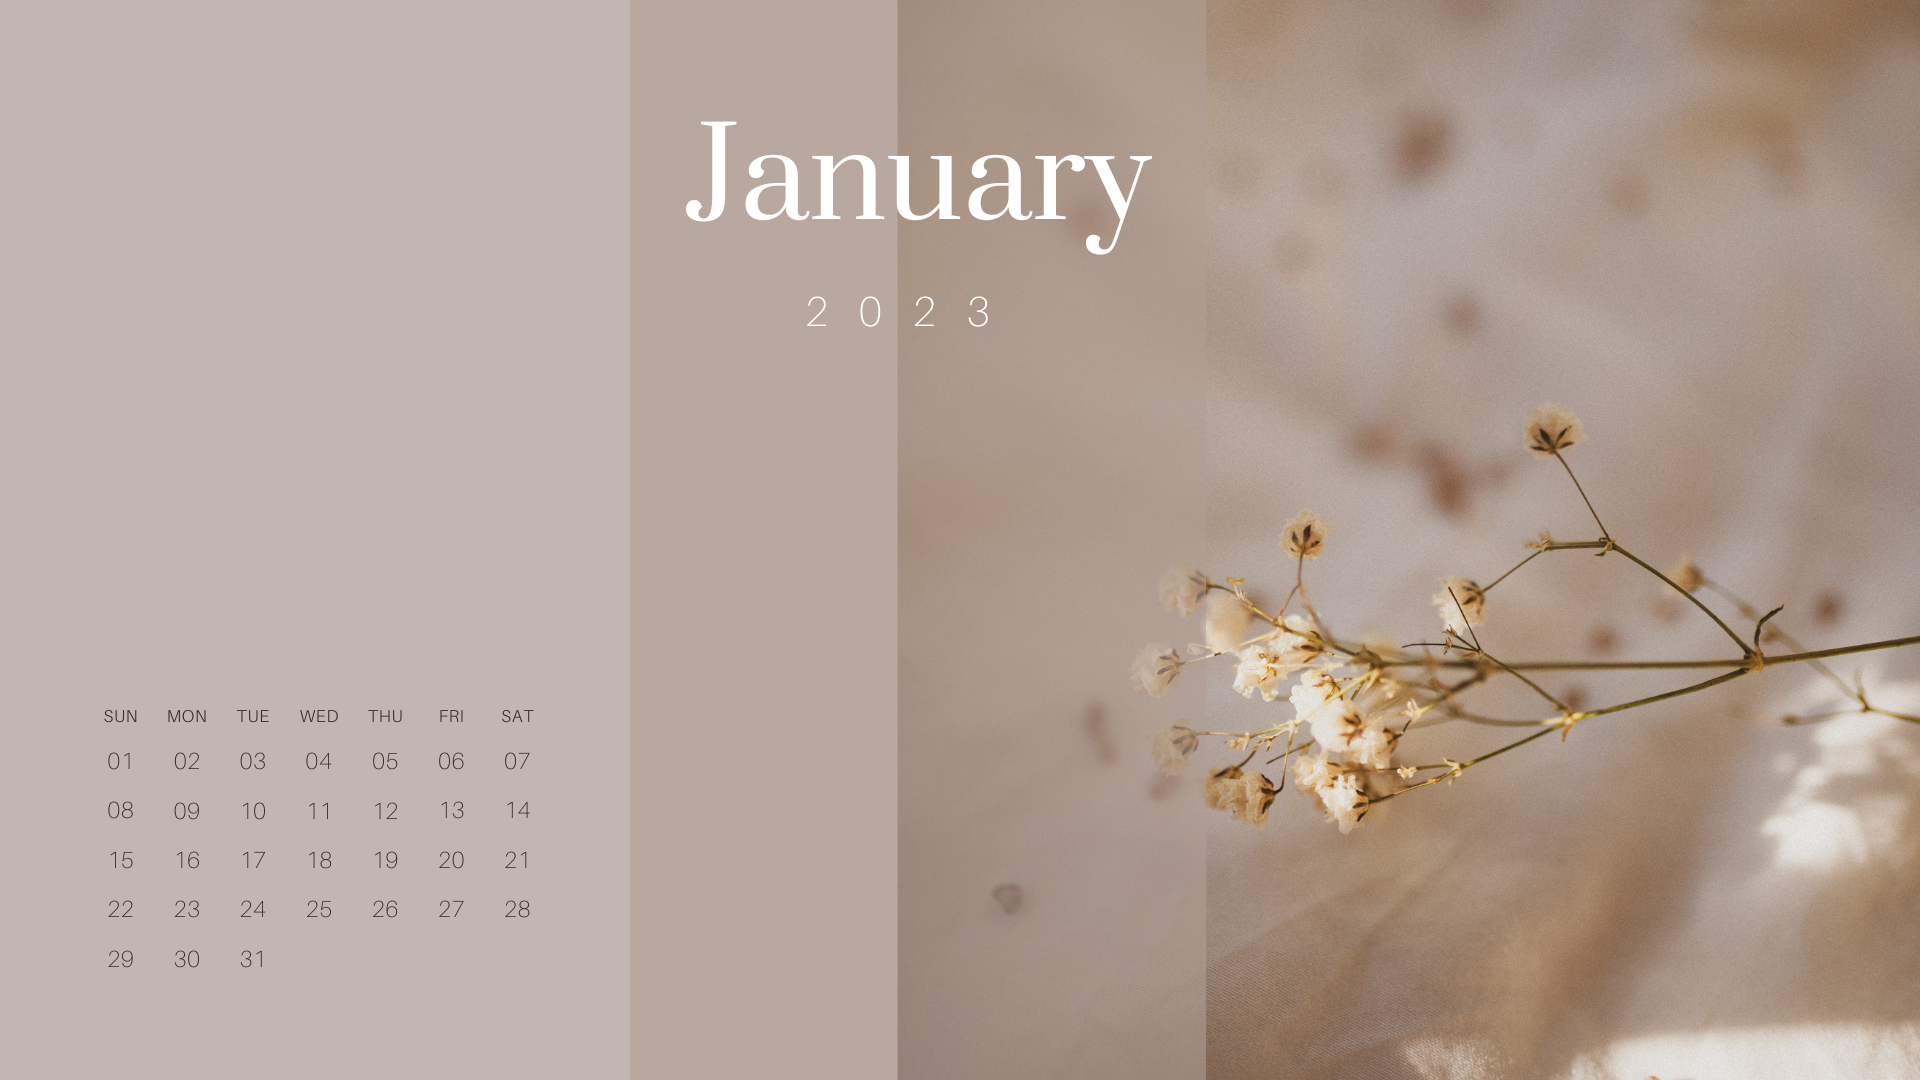 January 2023 wallpaper background download now for free